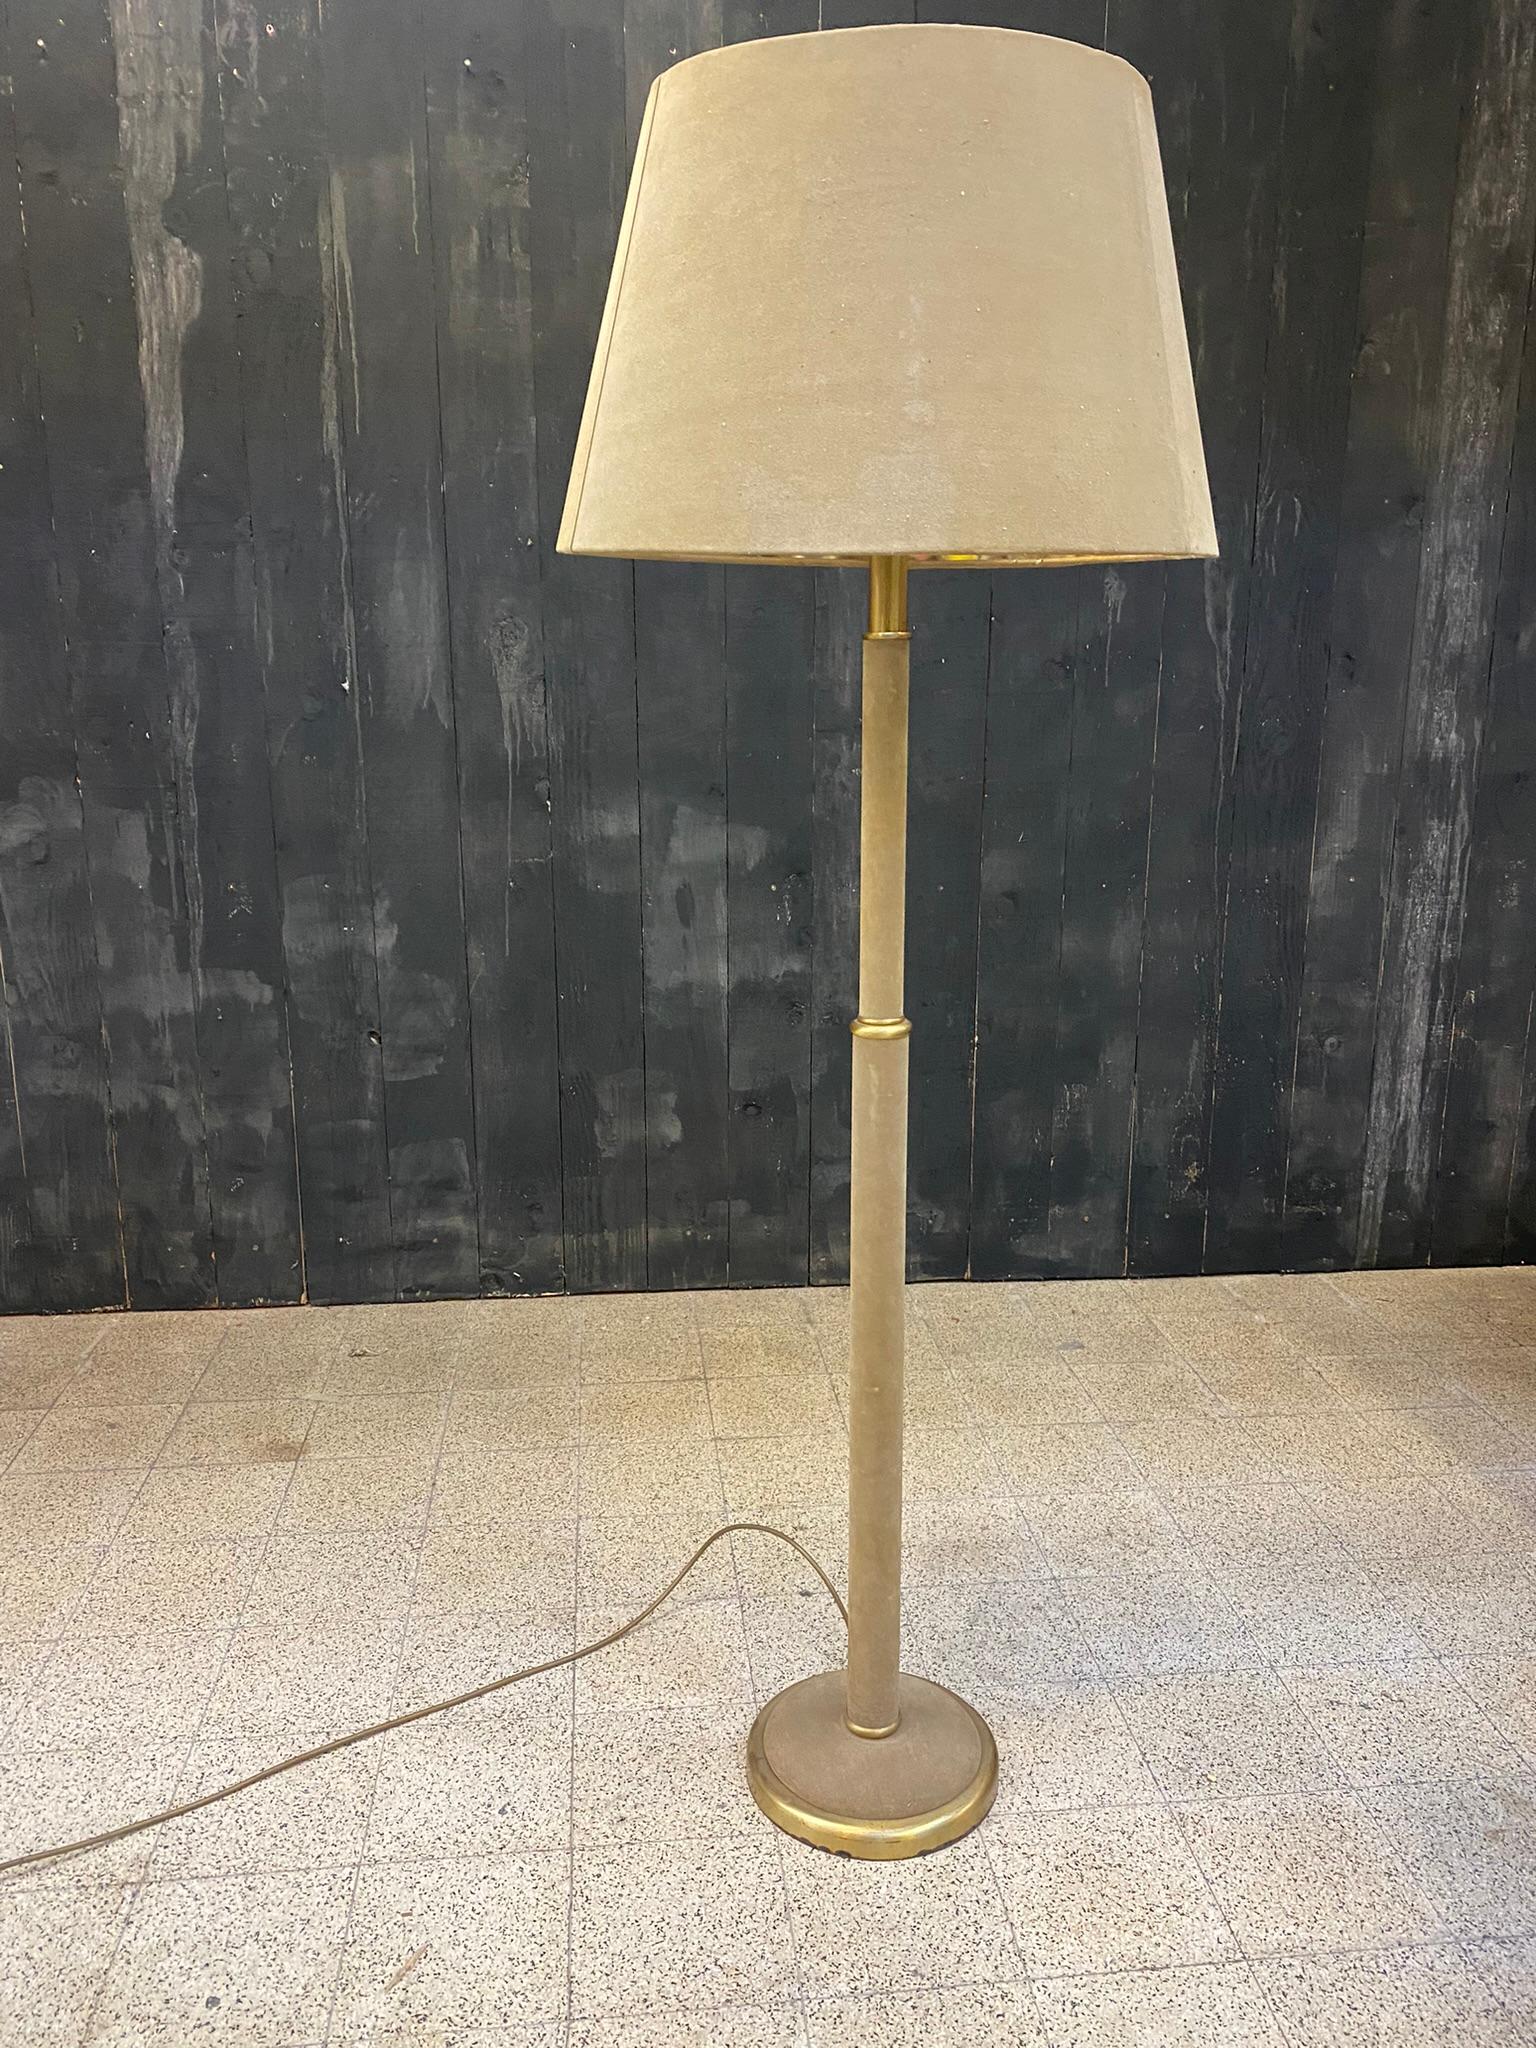 European Elegant Floor Lamp in Suede Leather in the Style of Jacques Adnet, circa 1960 For Sale